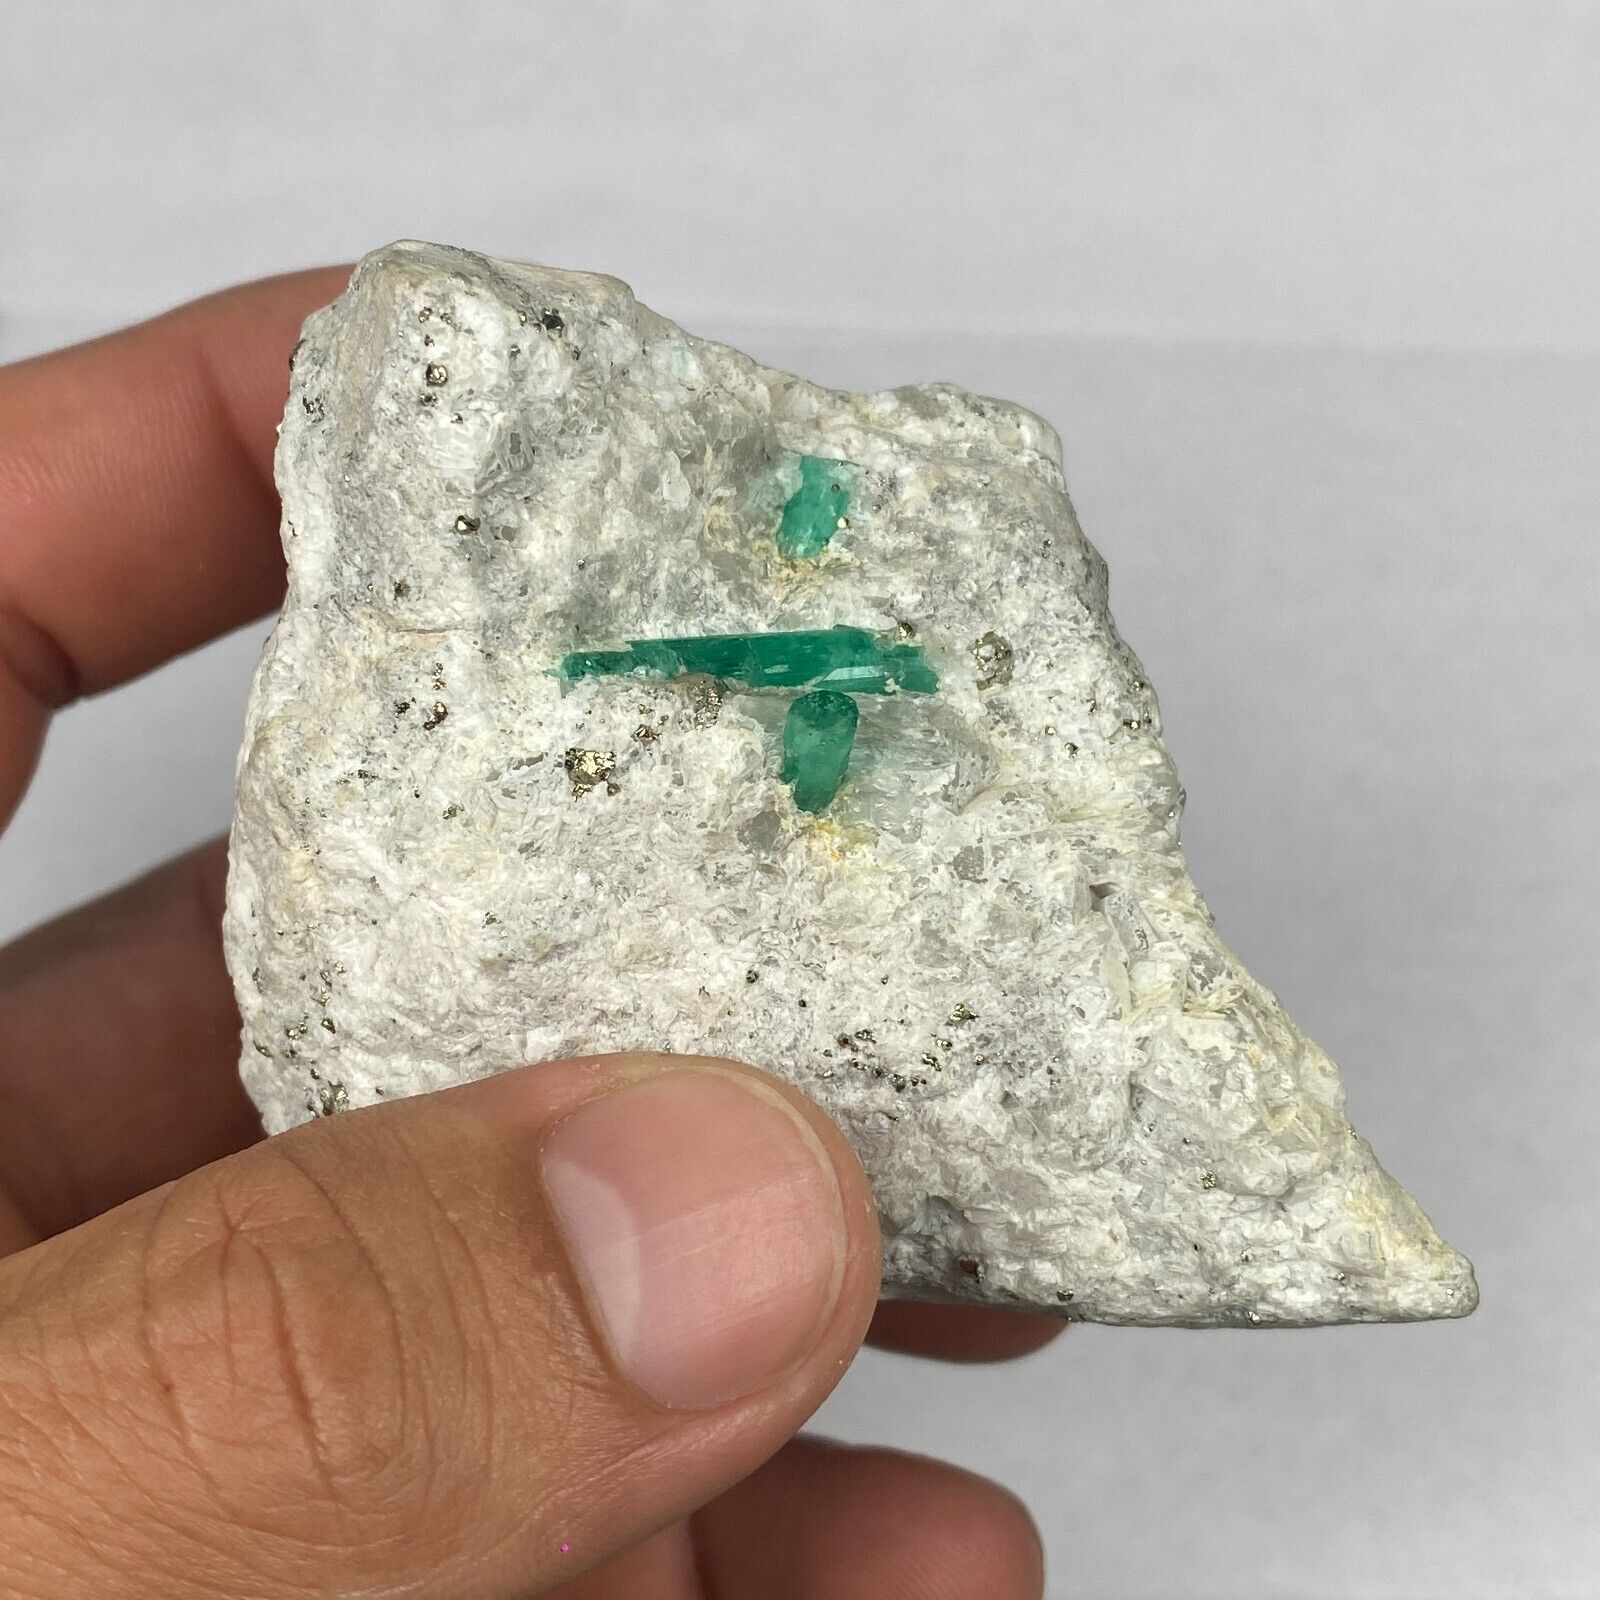 VERY CLEAR NATURAL EMERALD CRYSTAL ON MATRIX  FROM MUZO COLOMBIA 163.25 grams